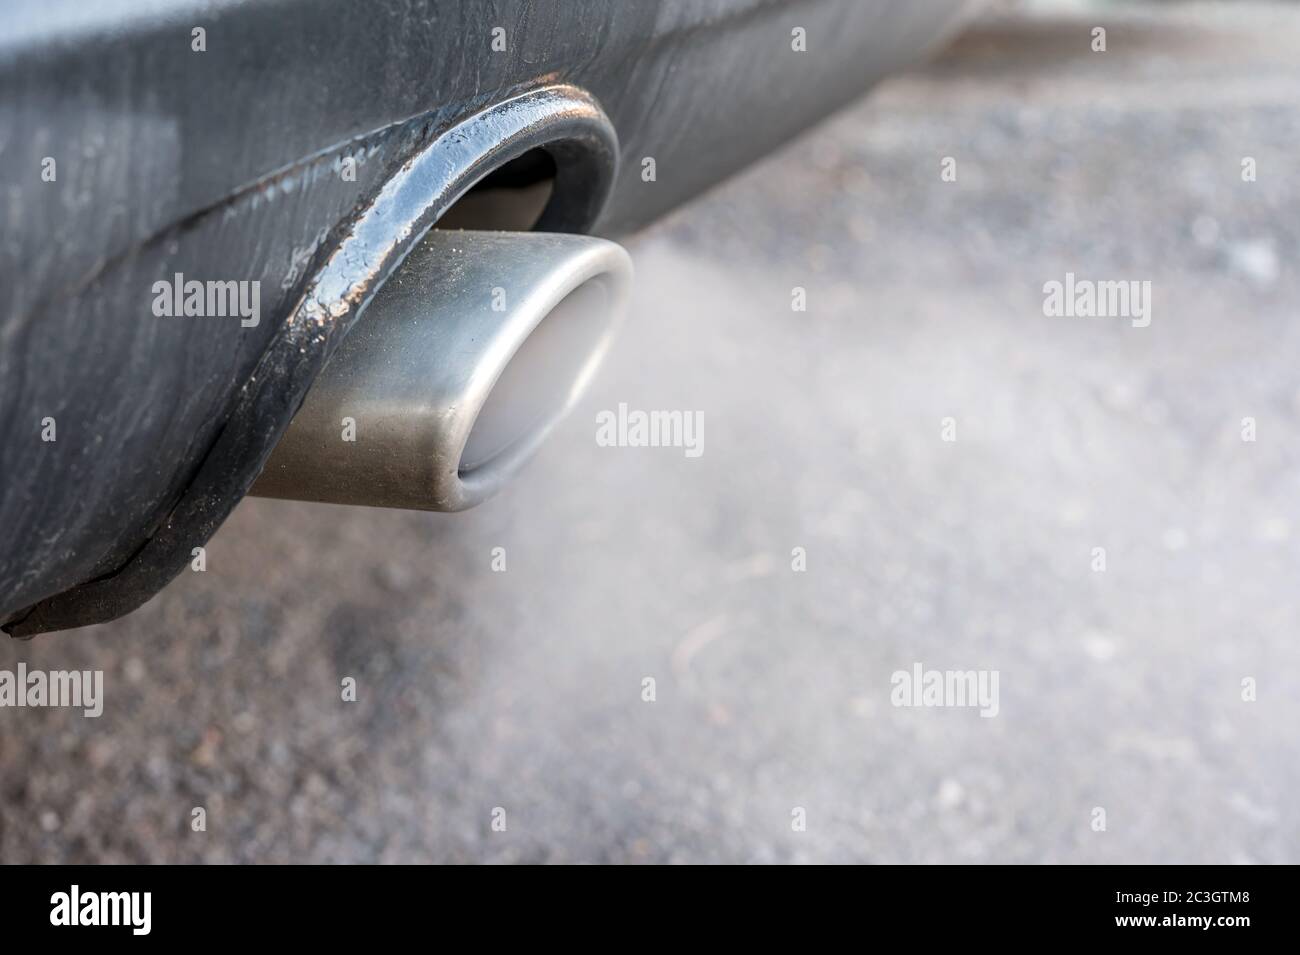 Car Exhaust Fumes High Resolution Stock Photography and Images - Alamy